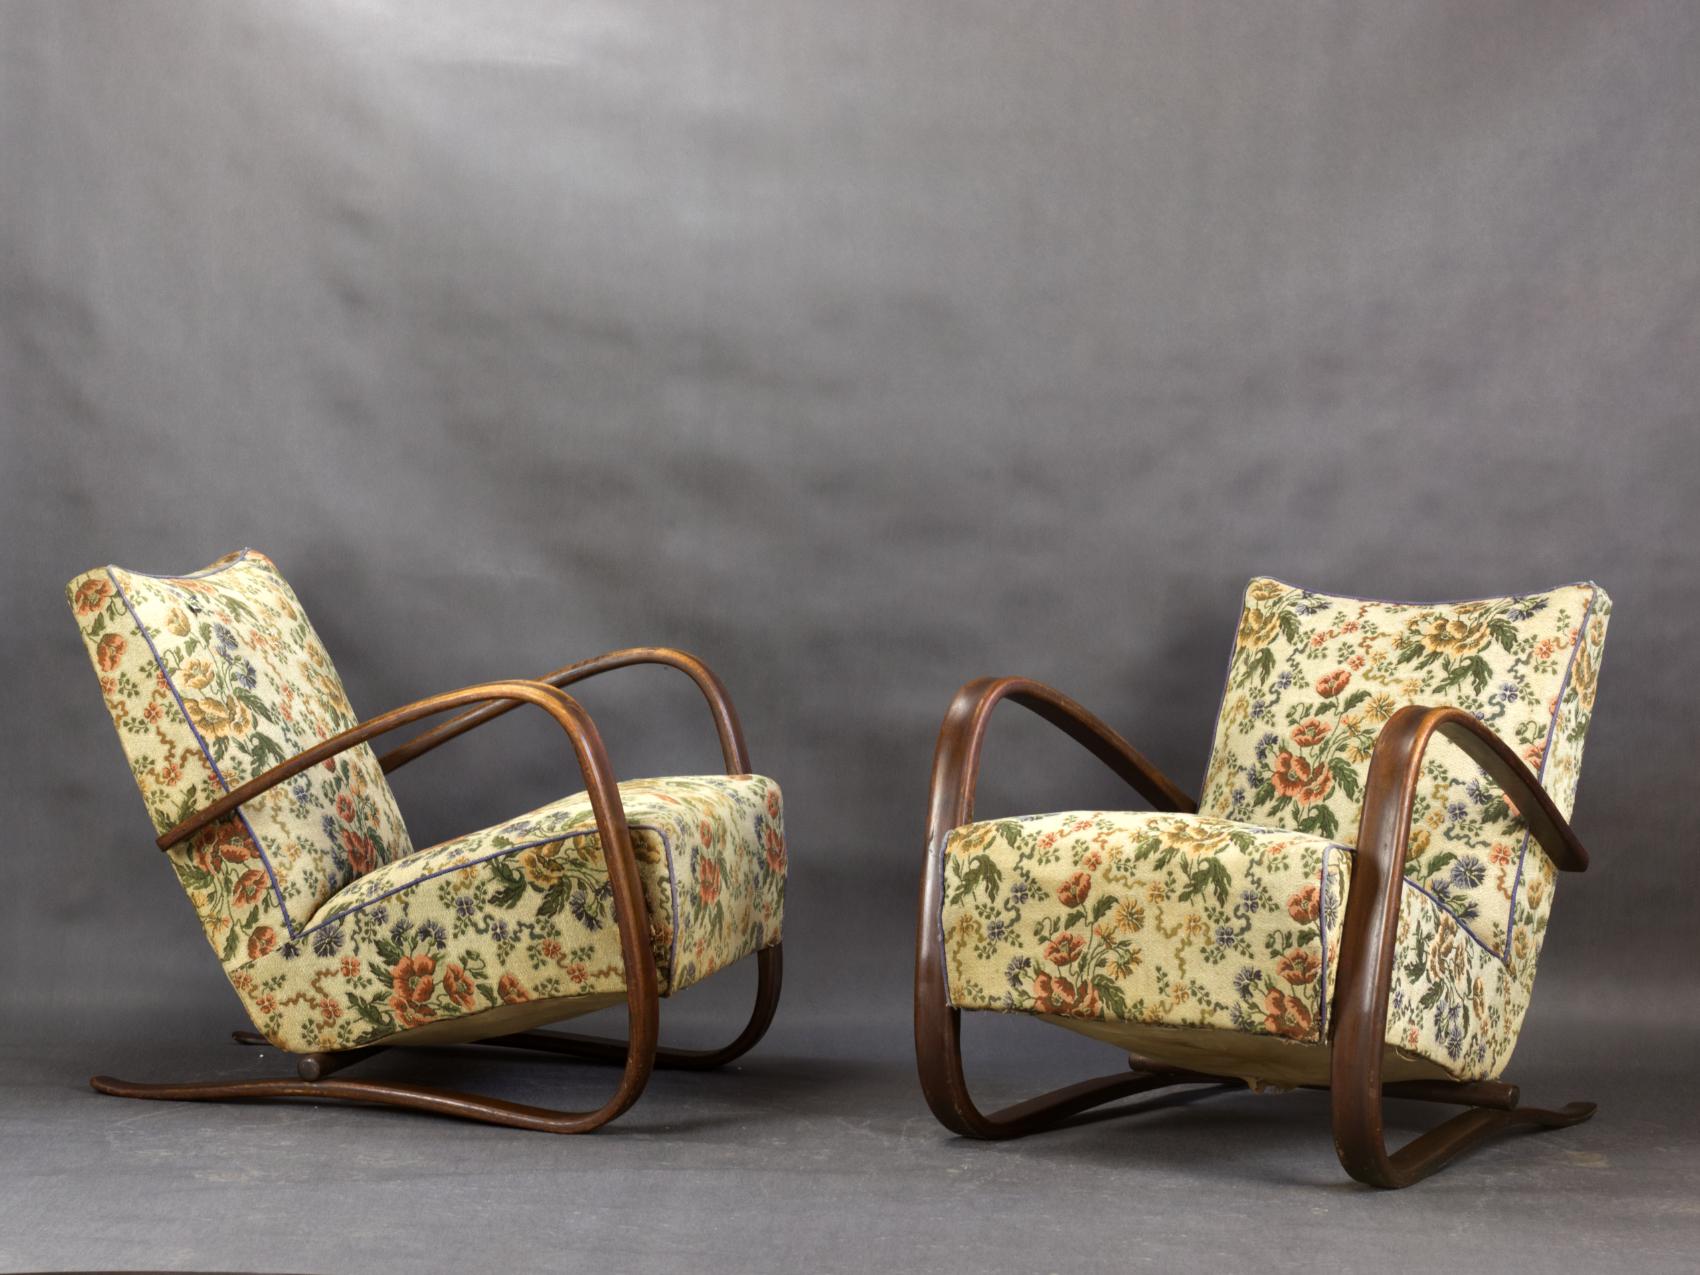 Pair of iconic H-269 lounge chairs by Jindrich Halabala for Up Závody Brno in good, original condition,
Czechoslovakia, 1930s. 
Small traces of inactive woodworm on one leg and torn fabric.

